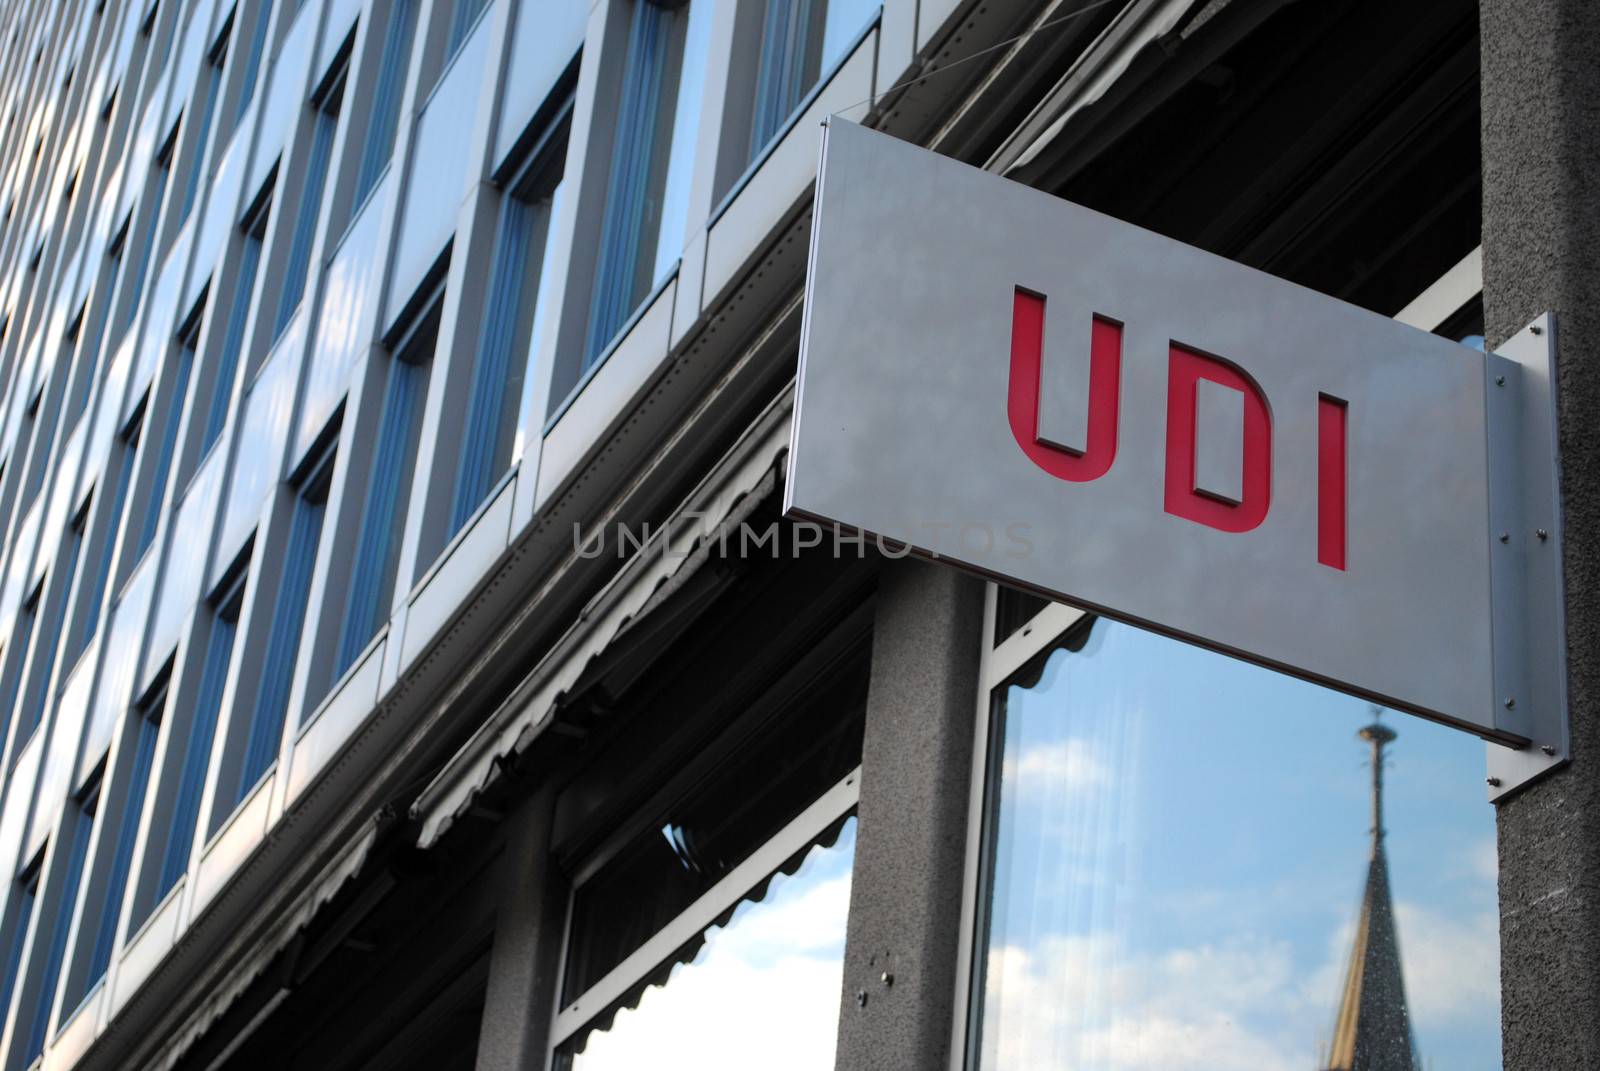 Norwegian Directorate of Immigration (UDI) sign by Brage